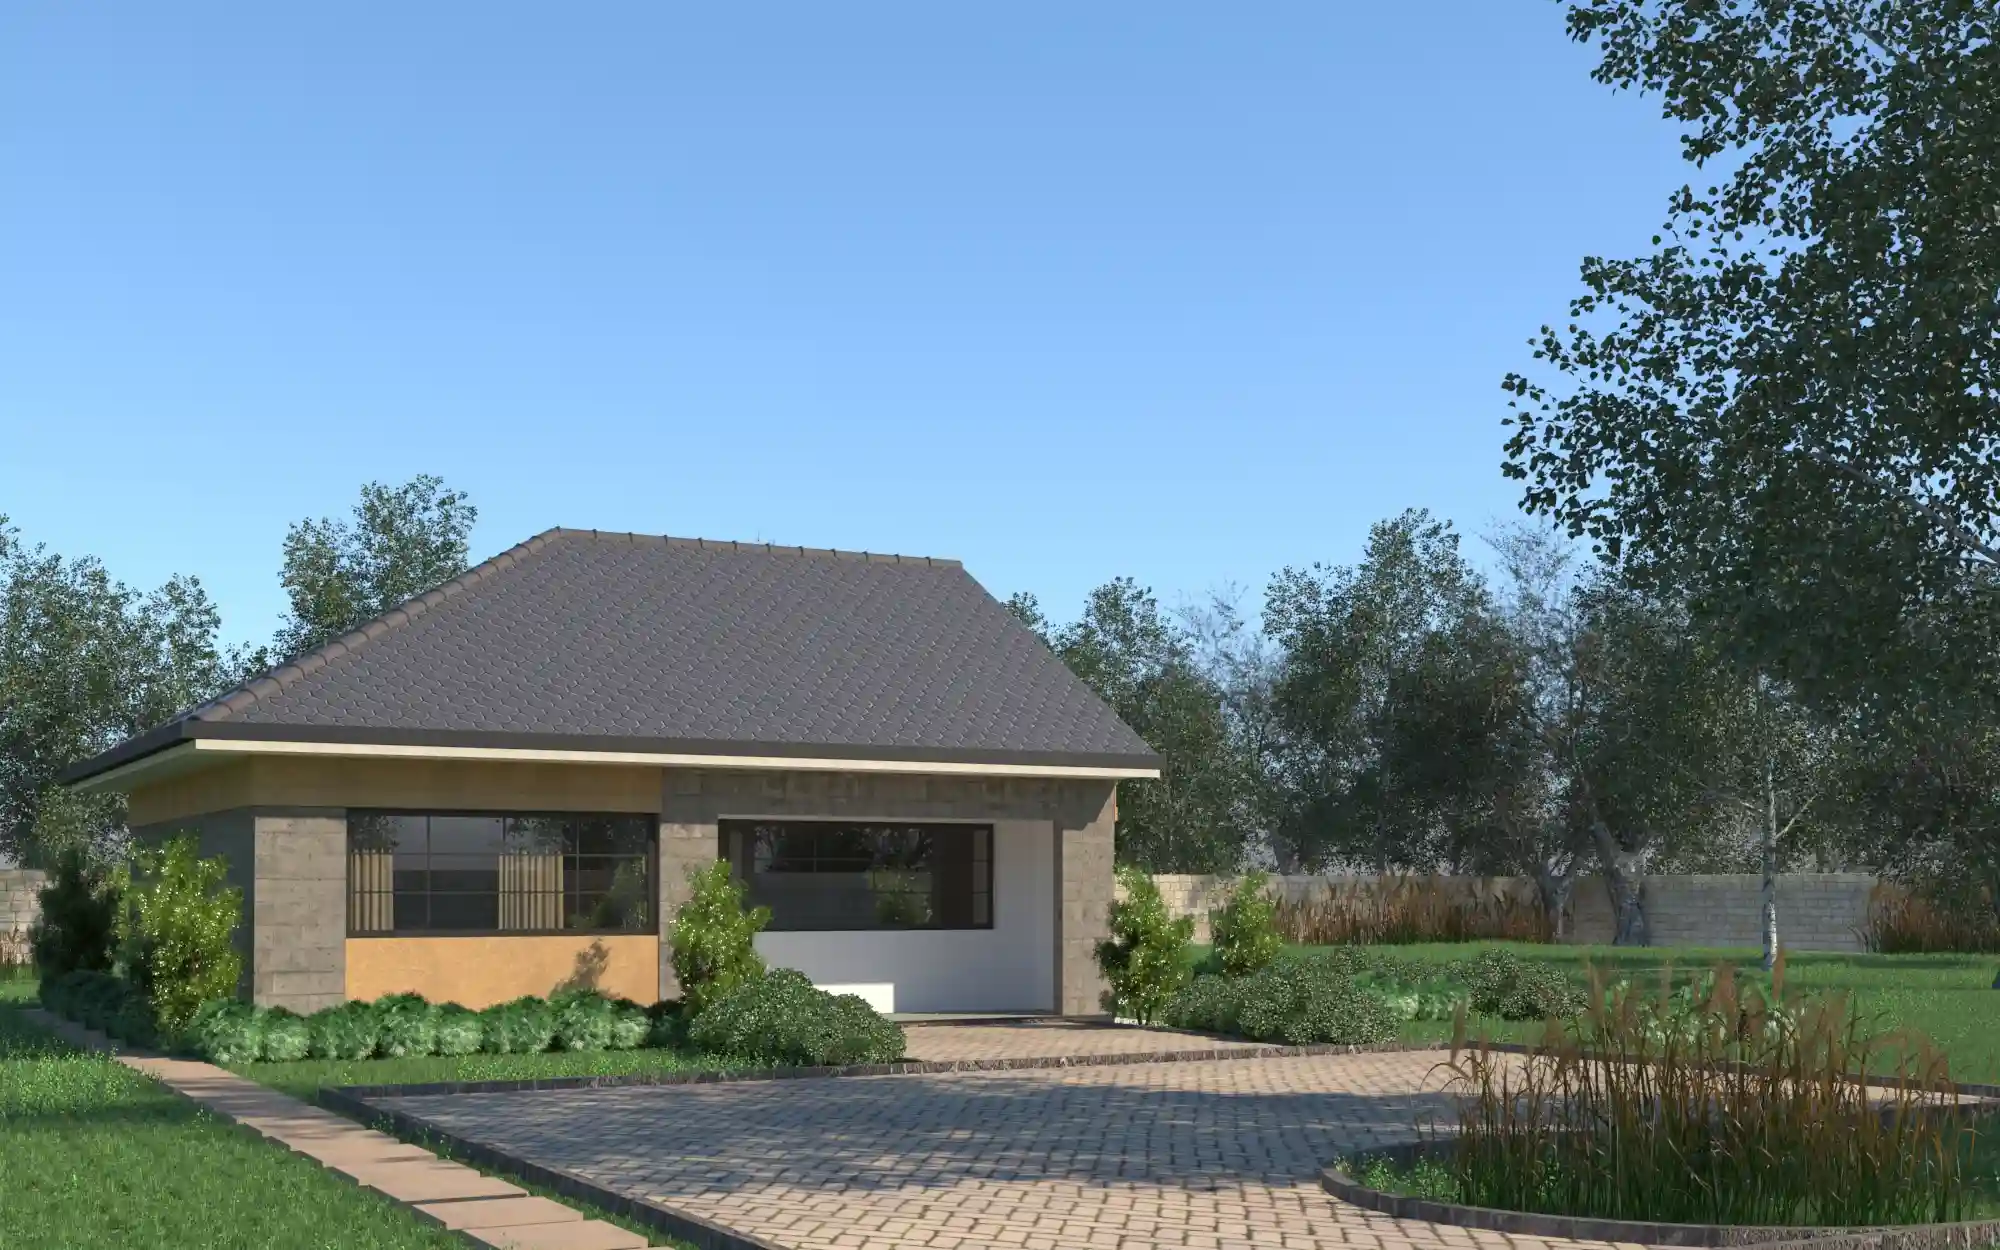 3 Bedroom Bungalow - ID 31101 - Phase 2 - Front from Inuua Tujenge house plans with 3 bedrooms and 2 bathrooms. ( jengapolepole )